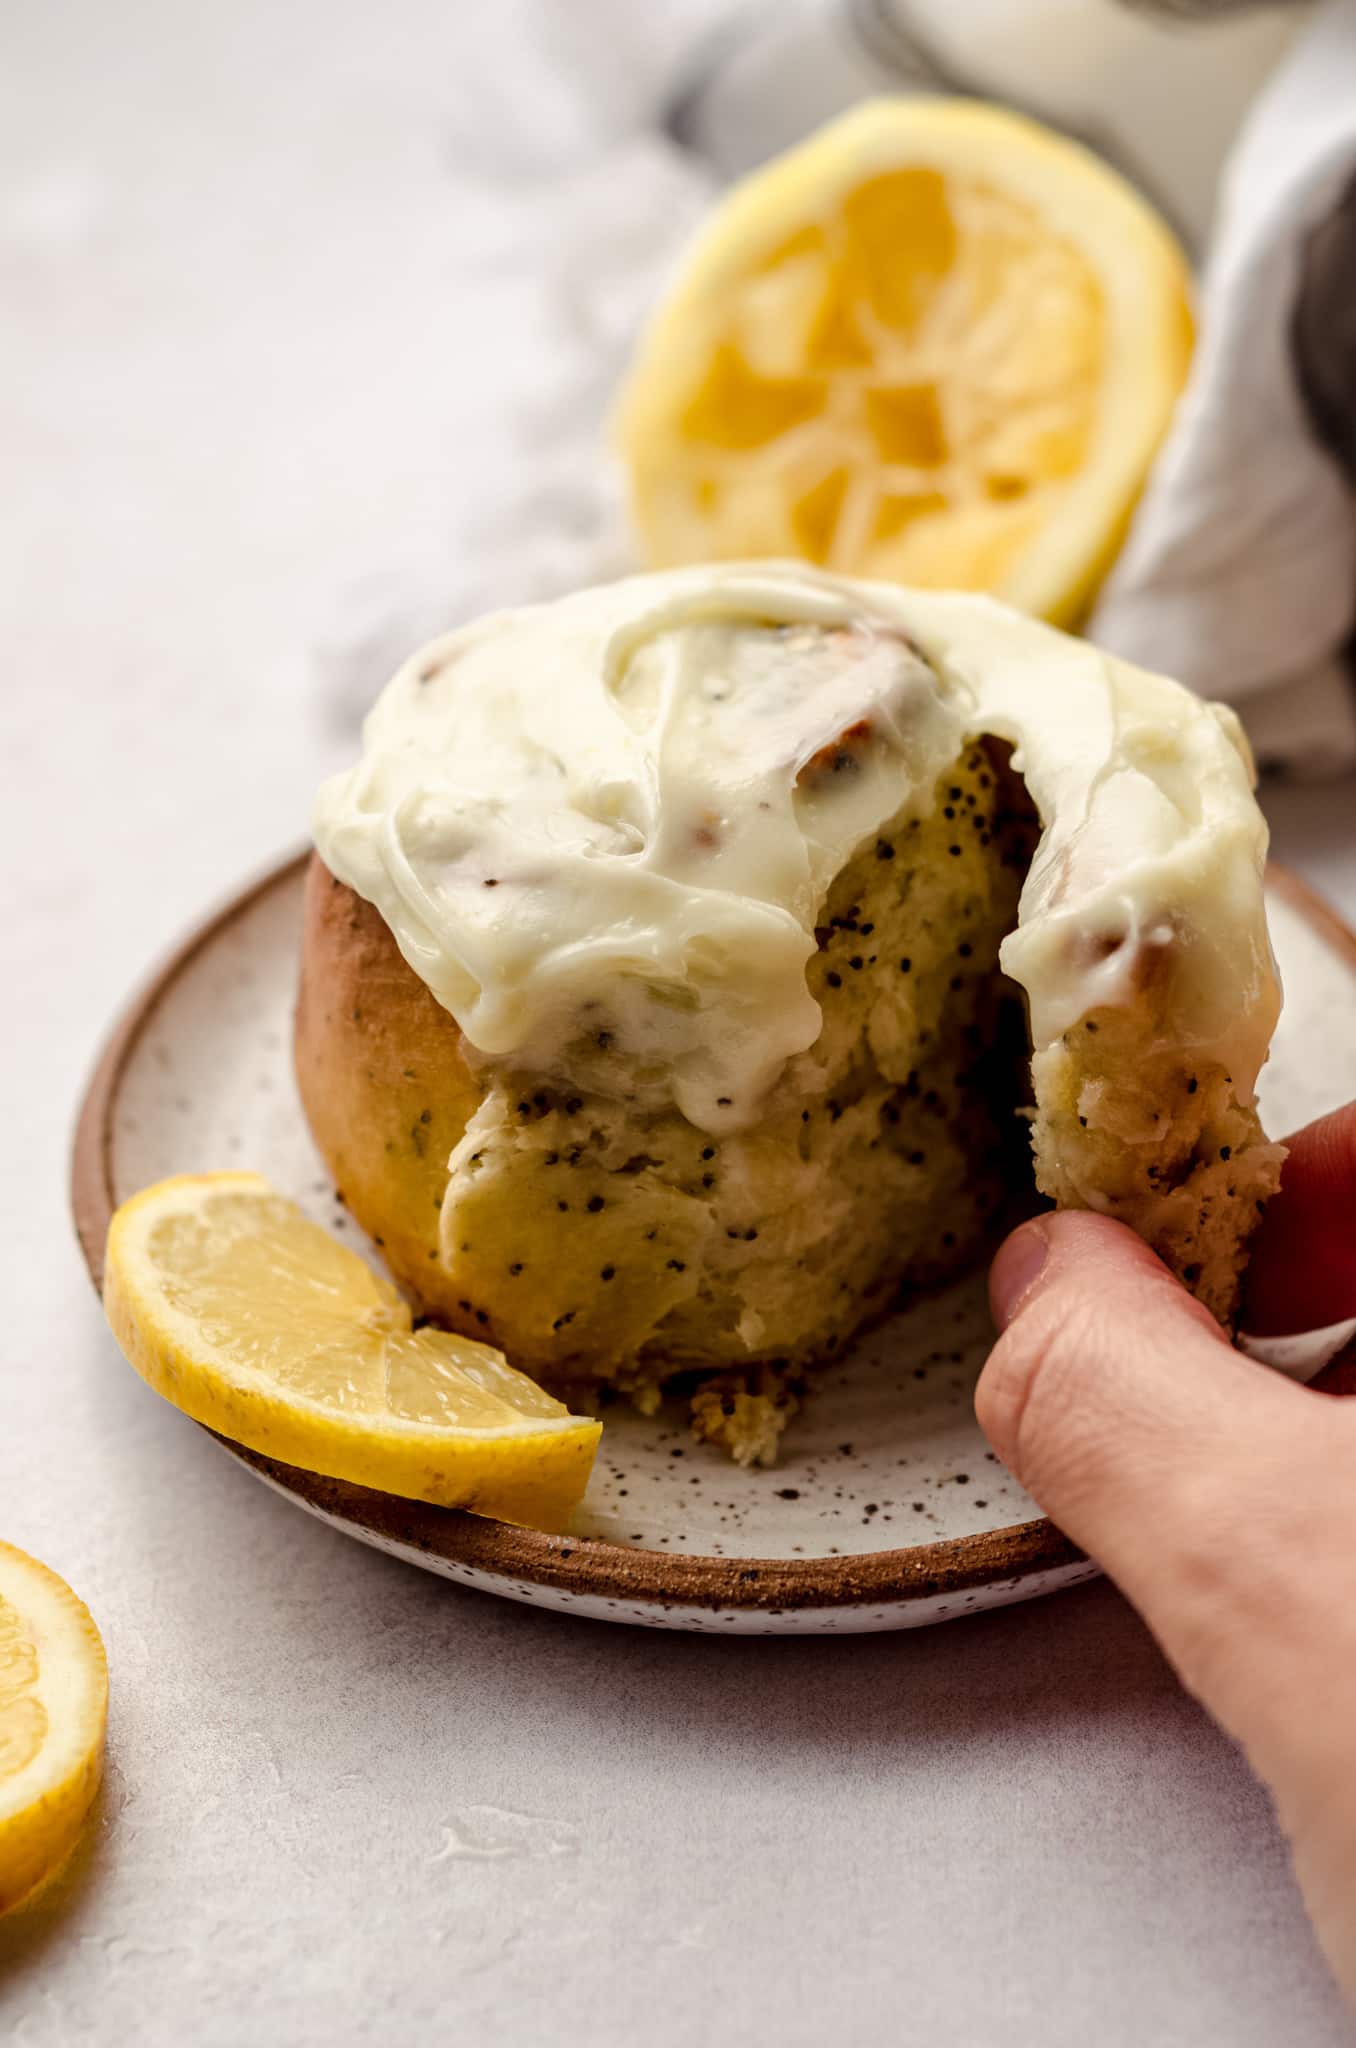 A hand reaching in to take apart a lemon poppy seed swirl roll with cream cheese frosting.